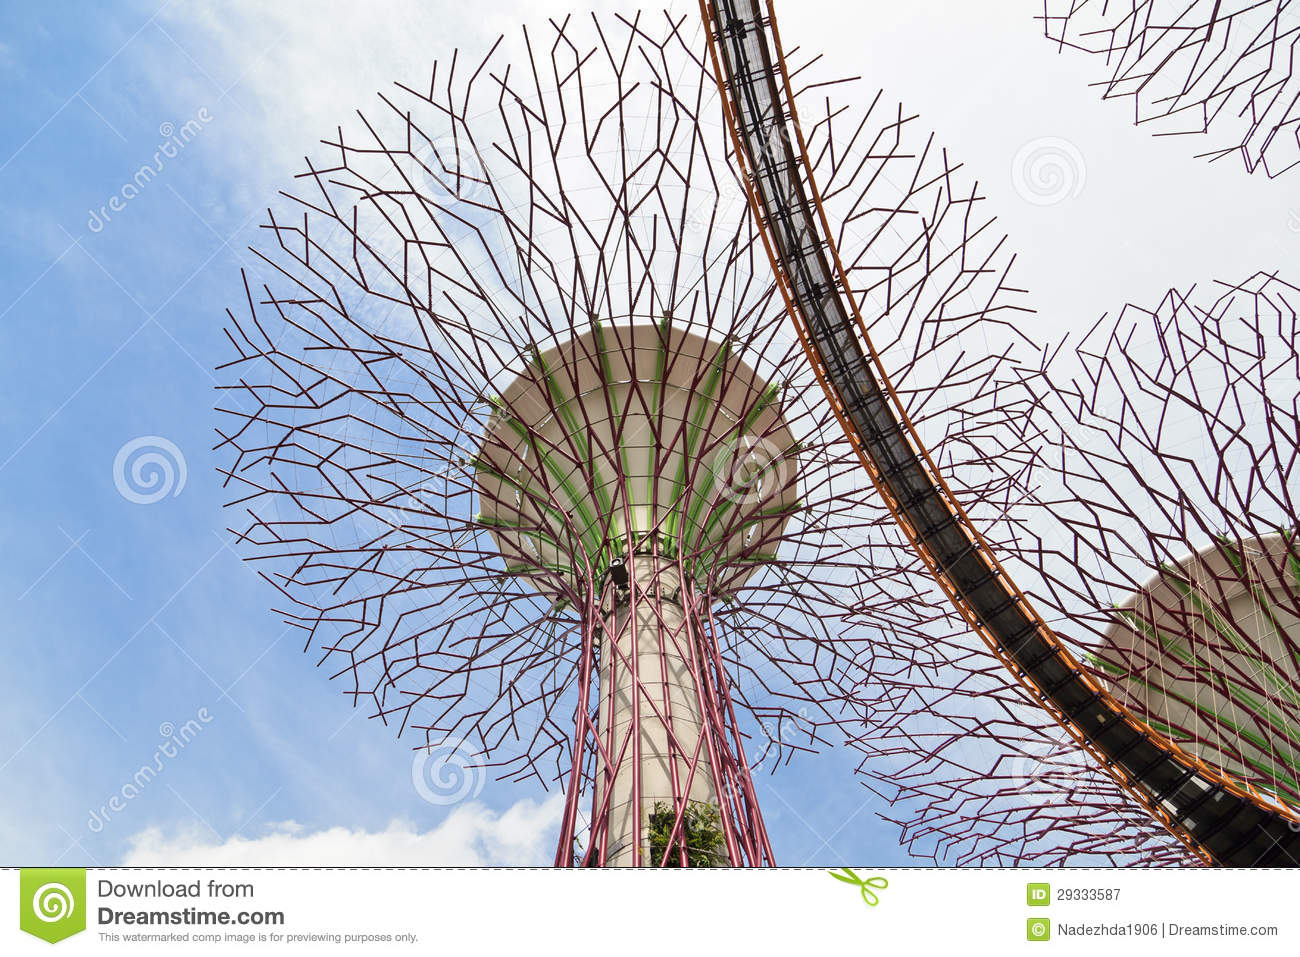 Super Trees In Gardens By The Bay Singapore Royalty Free Stock.